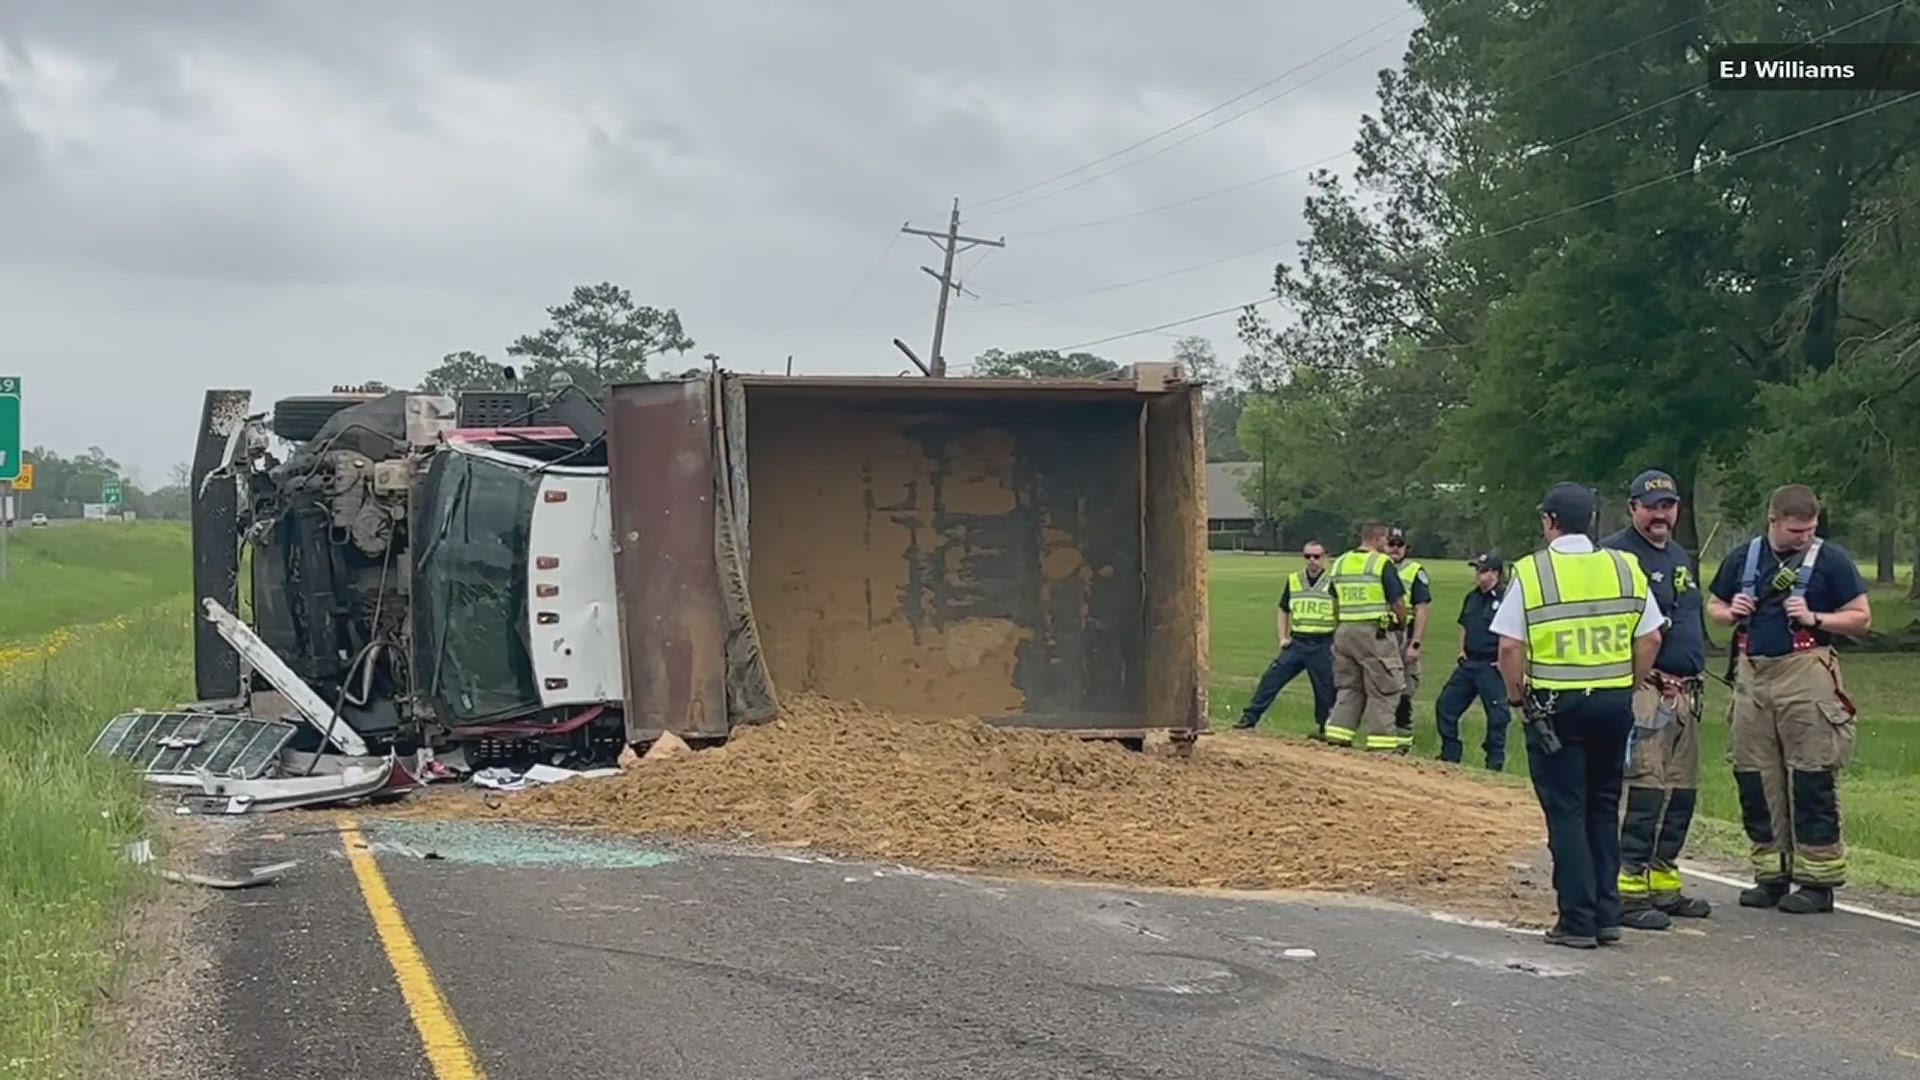 he truck was traveling toward Interstate 10 FM 1442 eastbound on the service road.